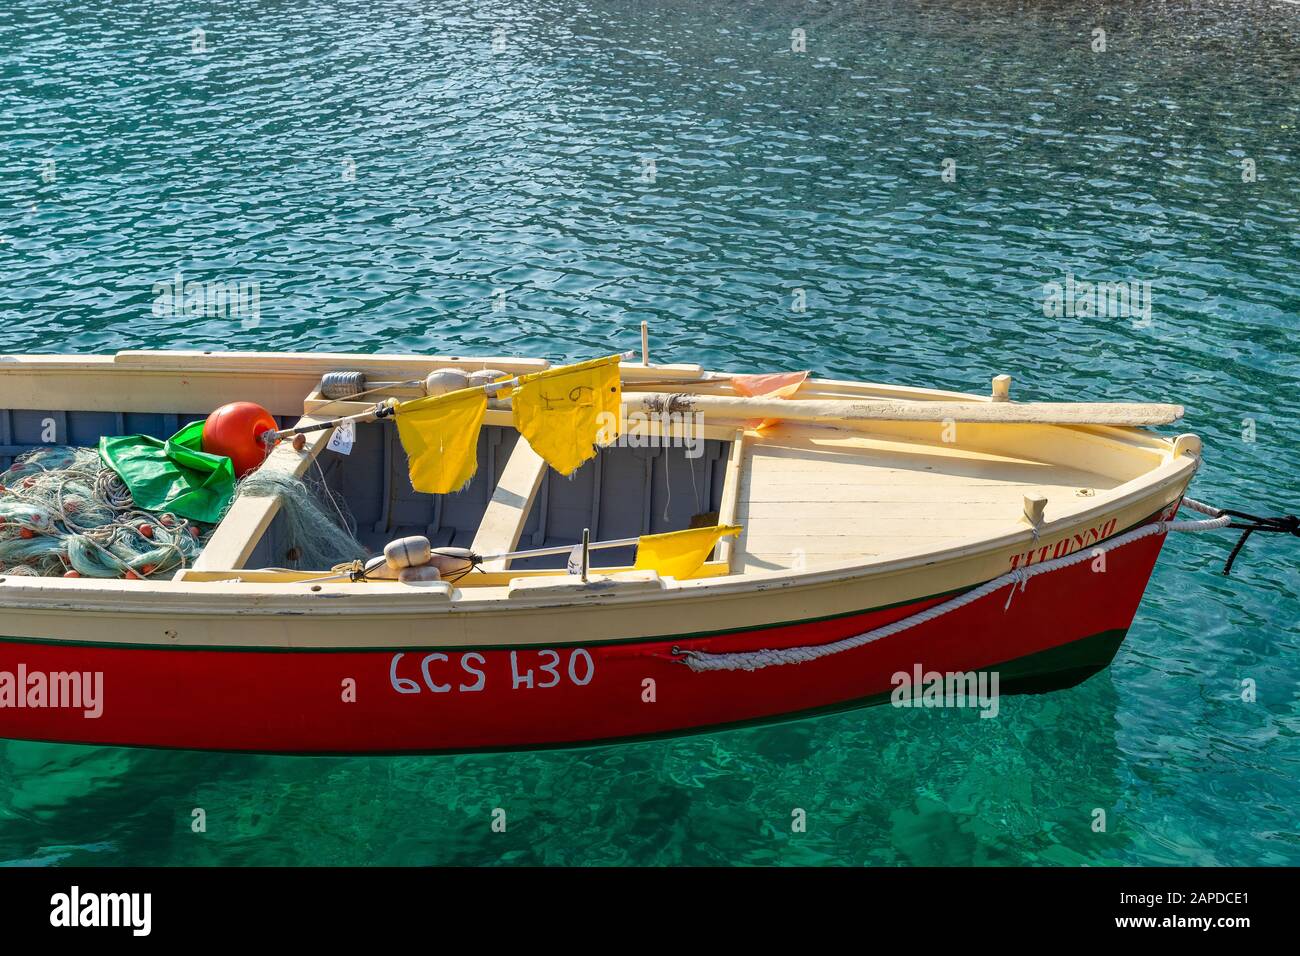 Part of a small fishing boat painted in bright red, beige and green colors in the blue water of the Mediterranean coast on a sunny day. There are padd Stock Photo